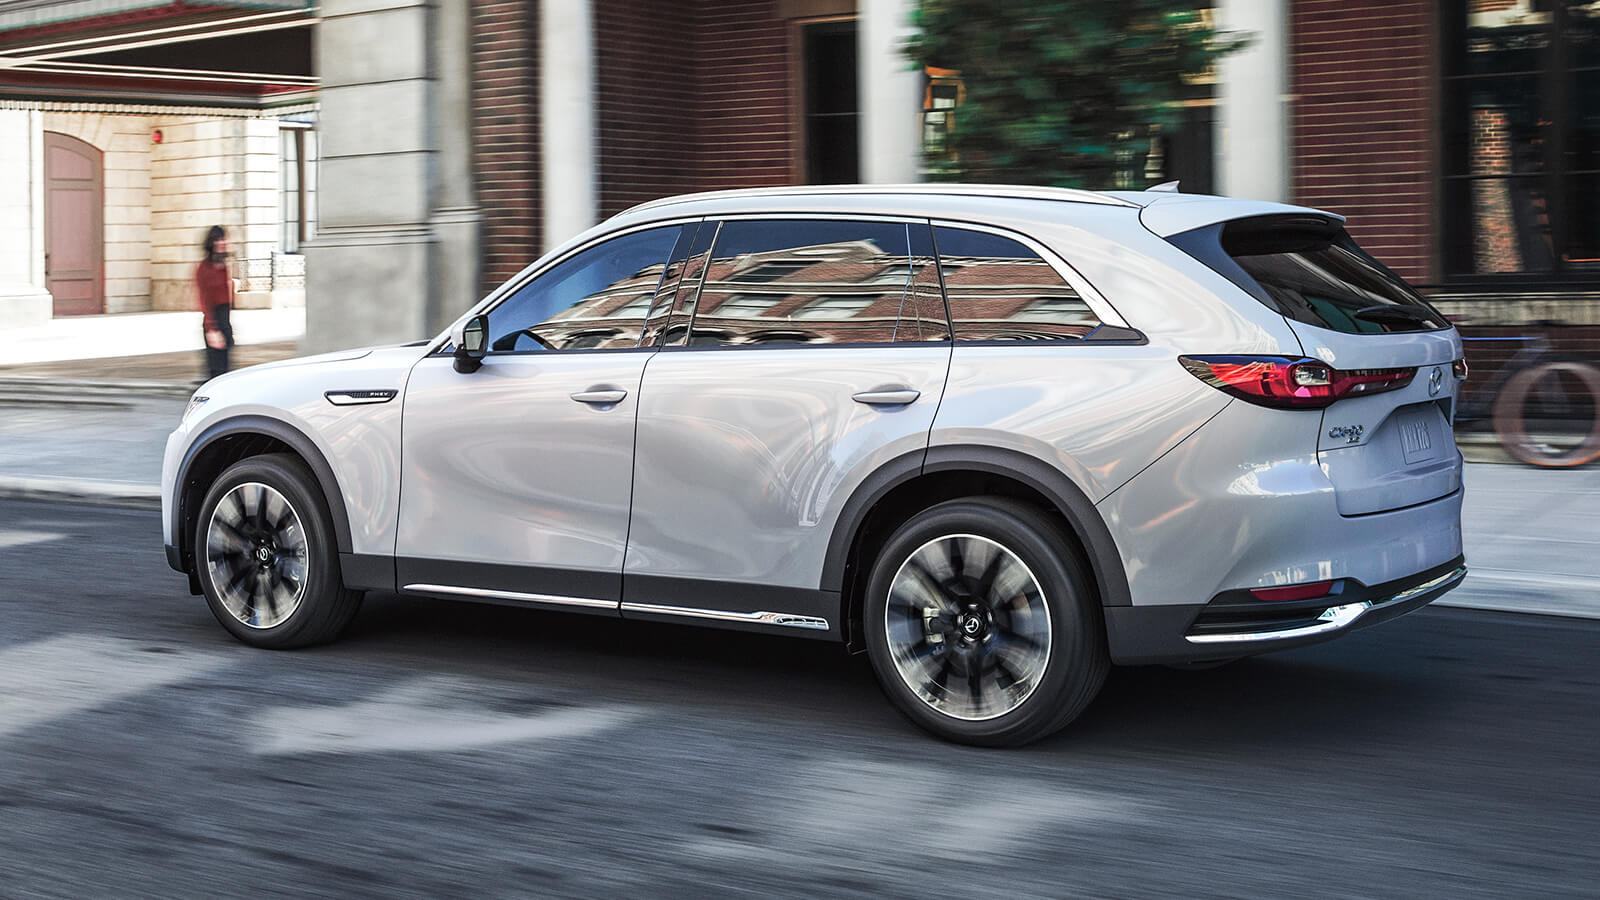 Artic White CX-90 PHEV passes a pedestrian in front of red brick building on city street